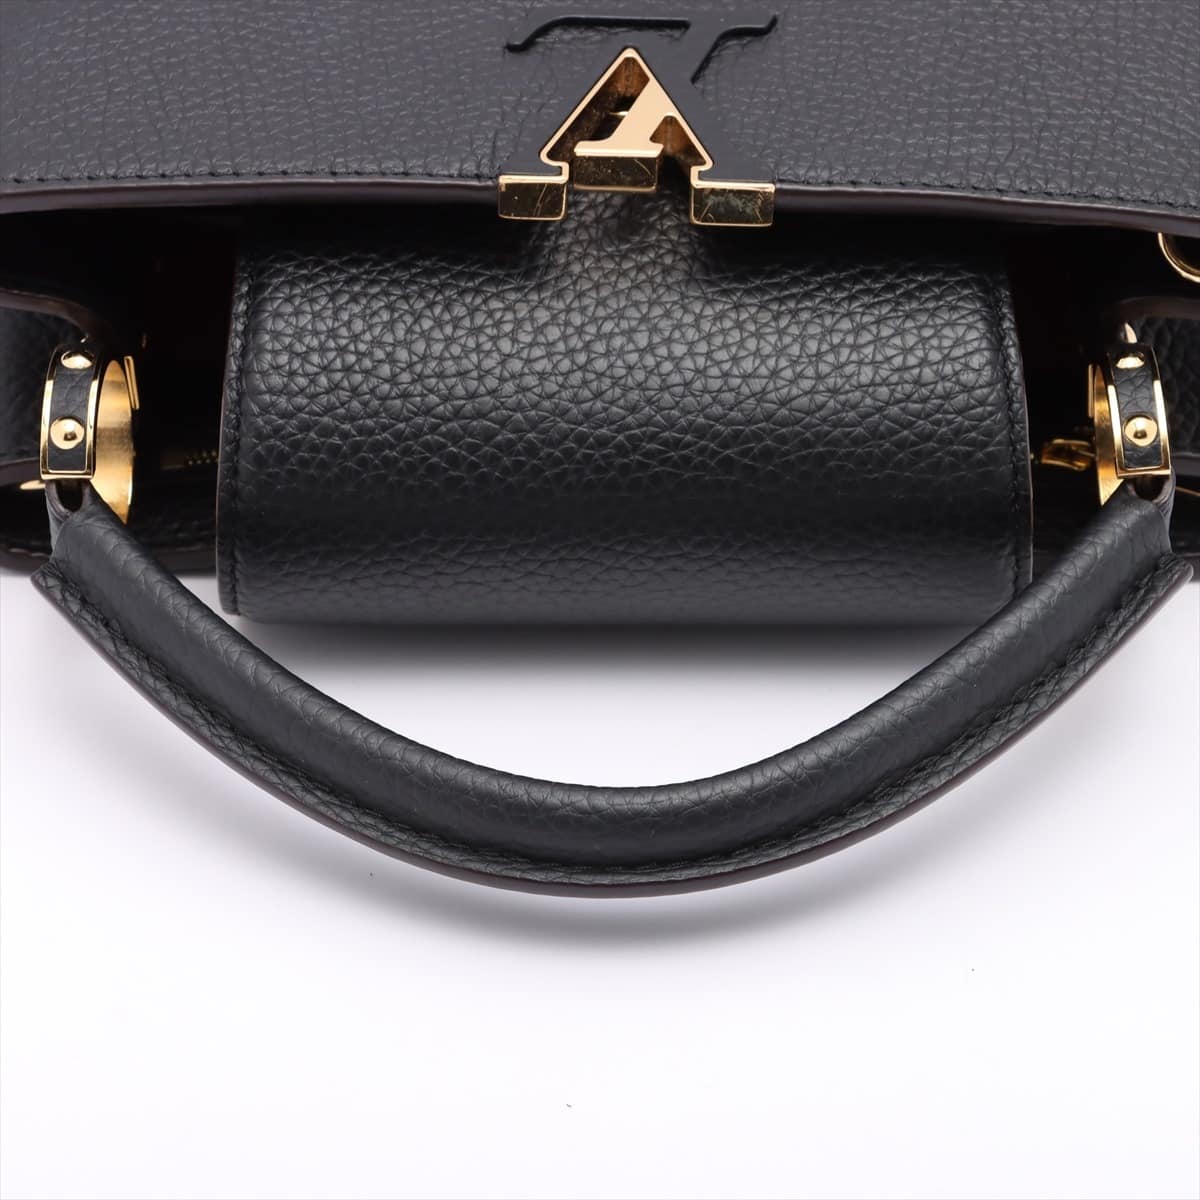 Louis Vuitton Cuir Taurillon Capucines BB M94755 There is a solid surface near the corner